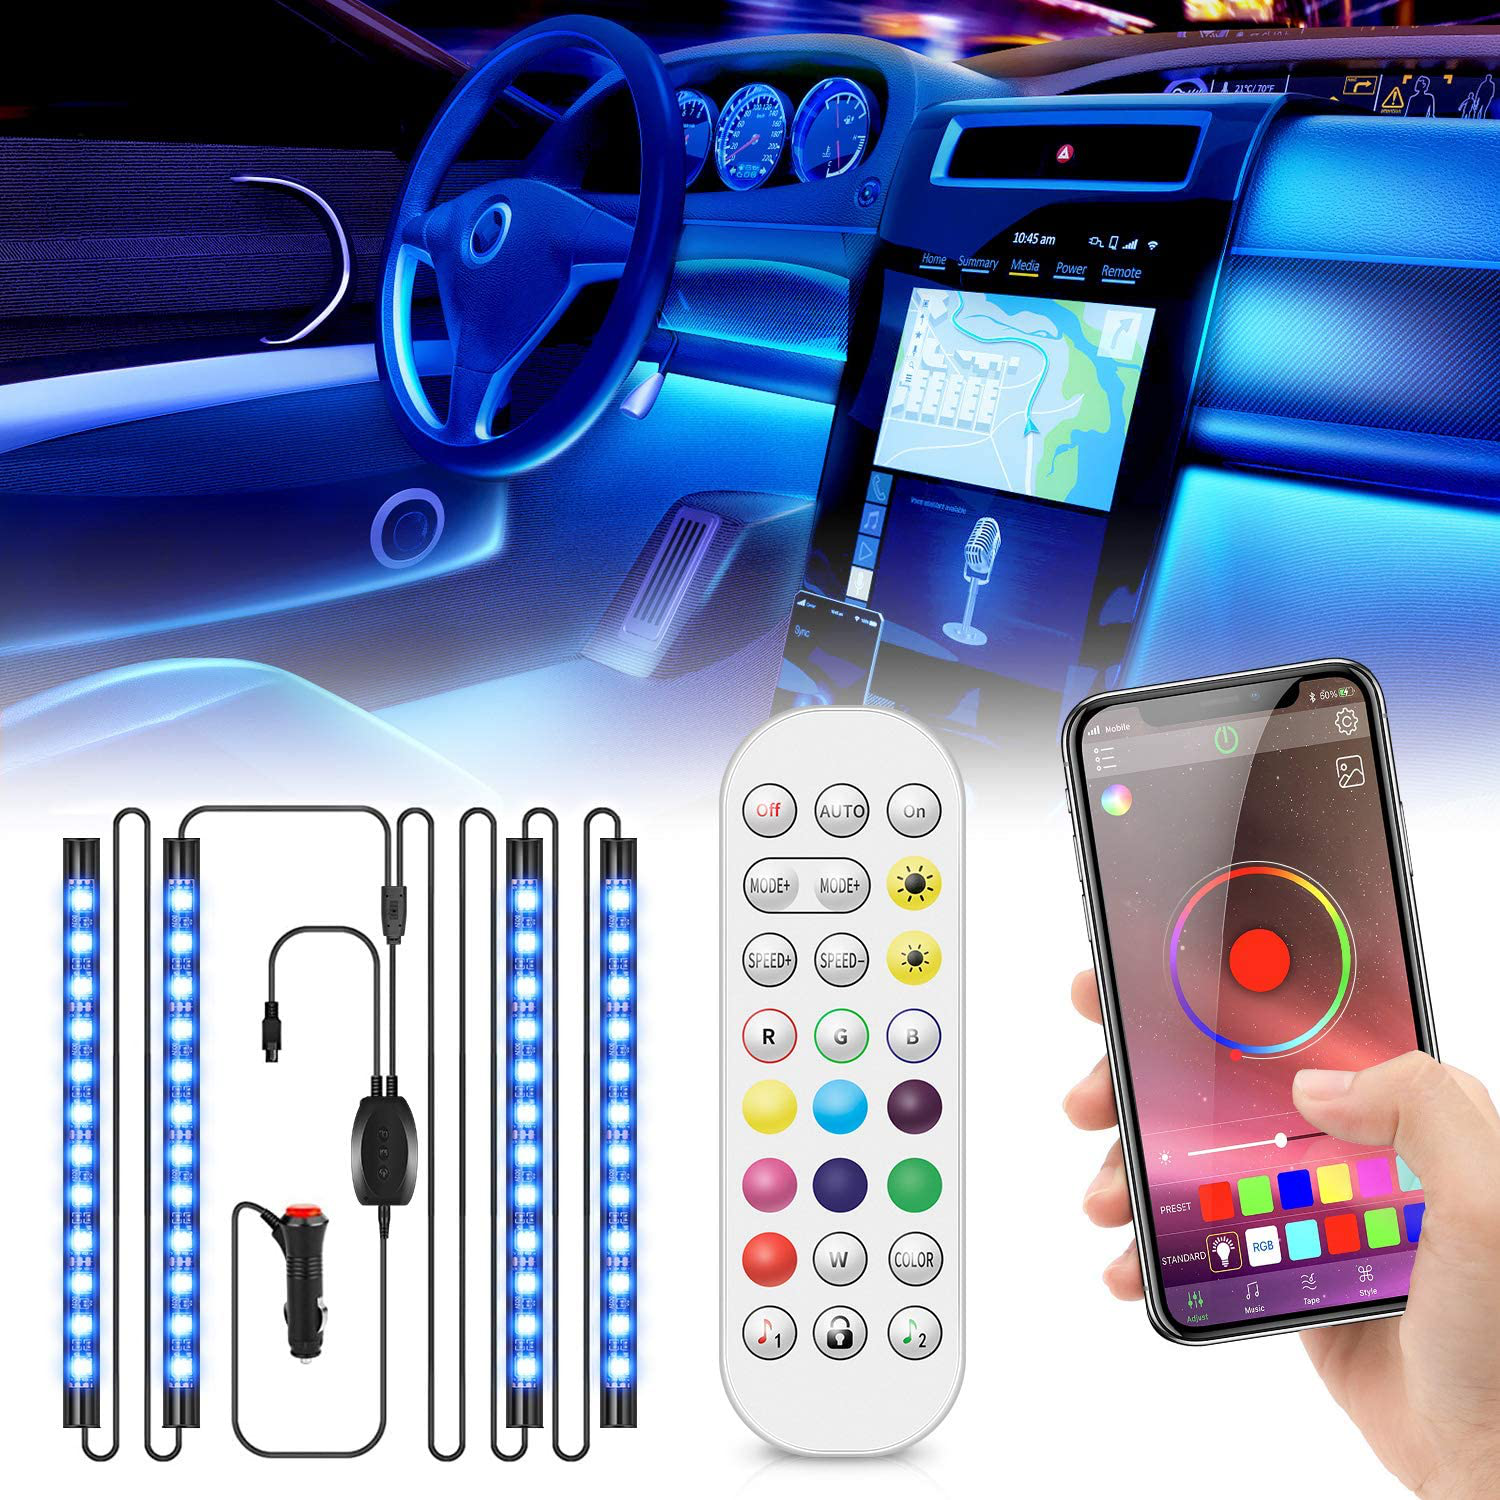 Interior Car Lights, Upgrade 2-in-1 Design DC 12V Sound Activated 48 Led Car Strip Lights, Box Control, Remote Control and APP Control Lighting Kits for All Vehicles, Parties, Indoor/Outdoor